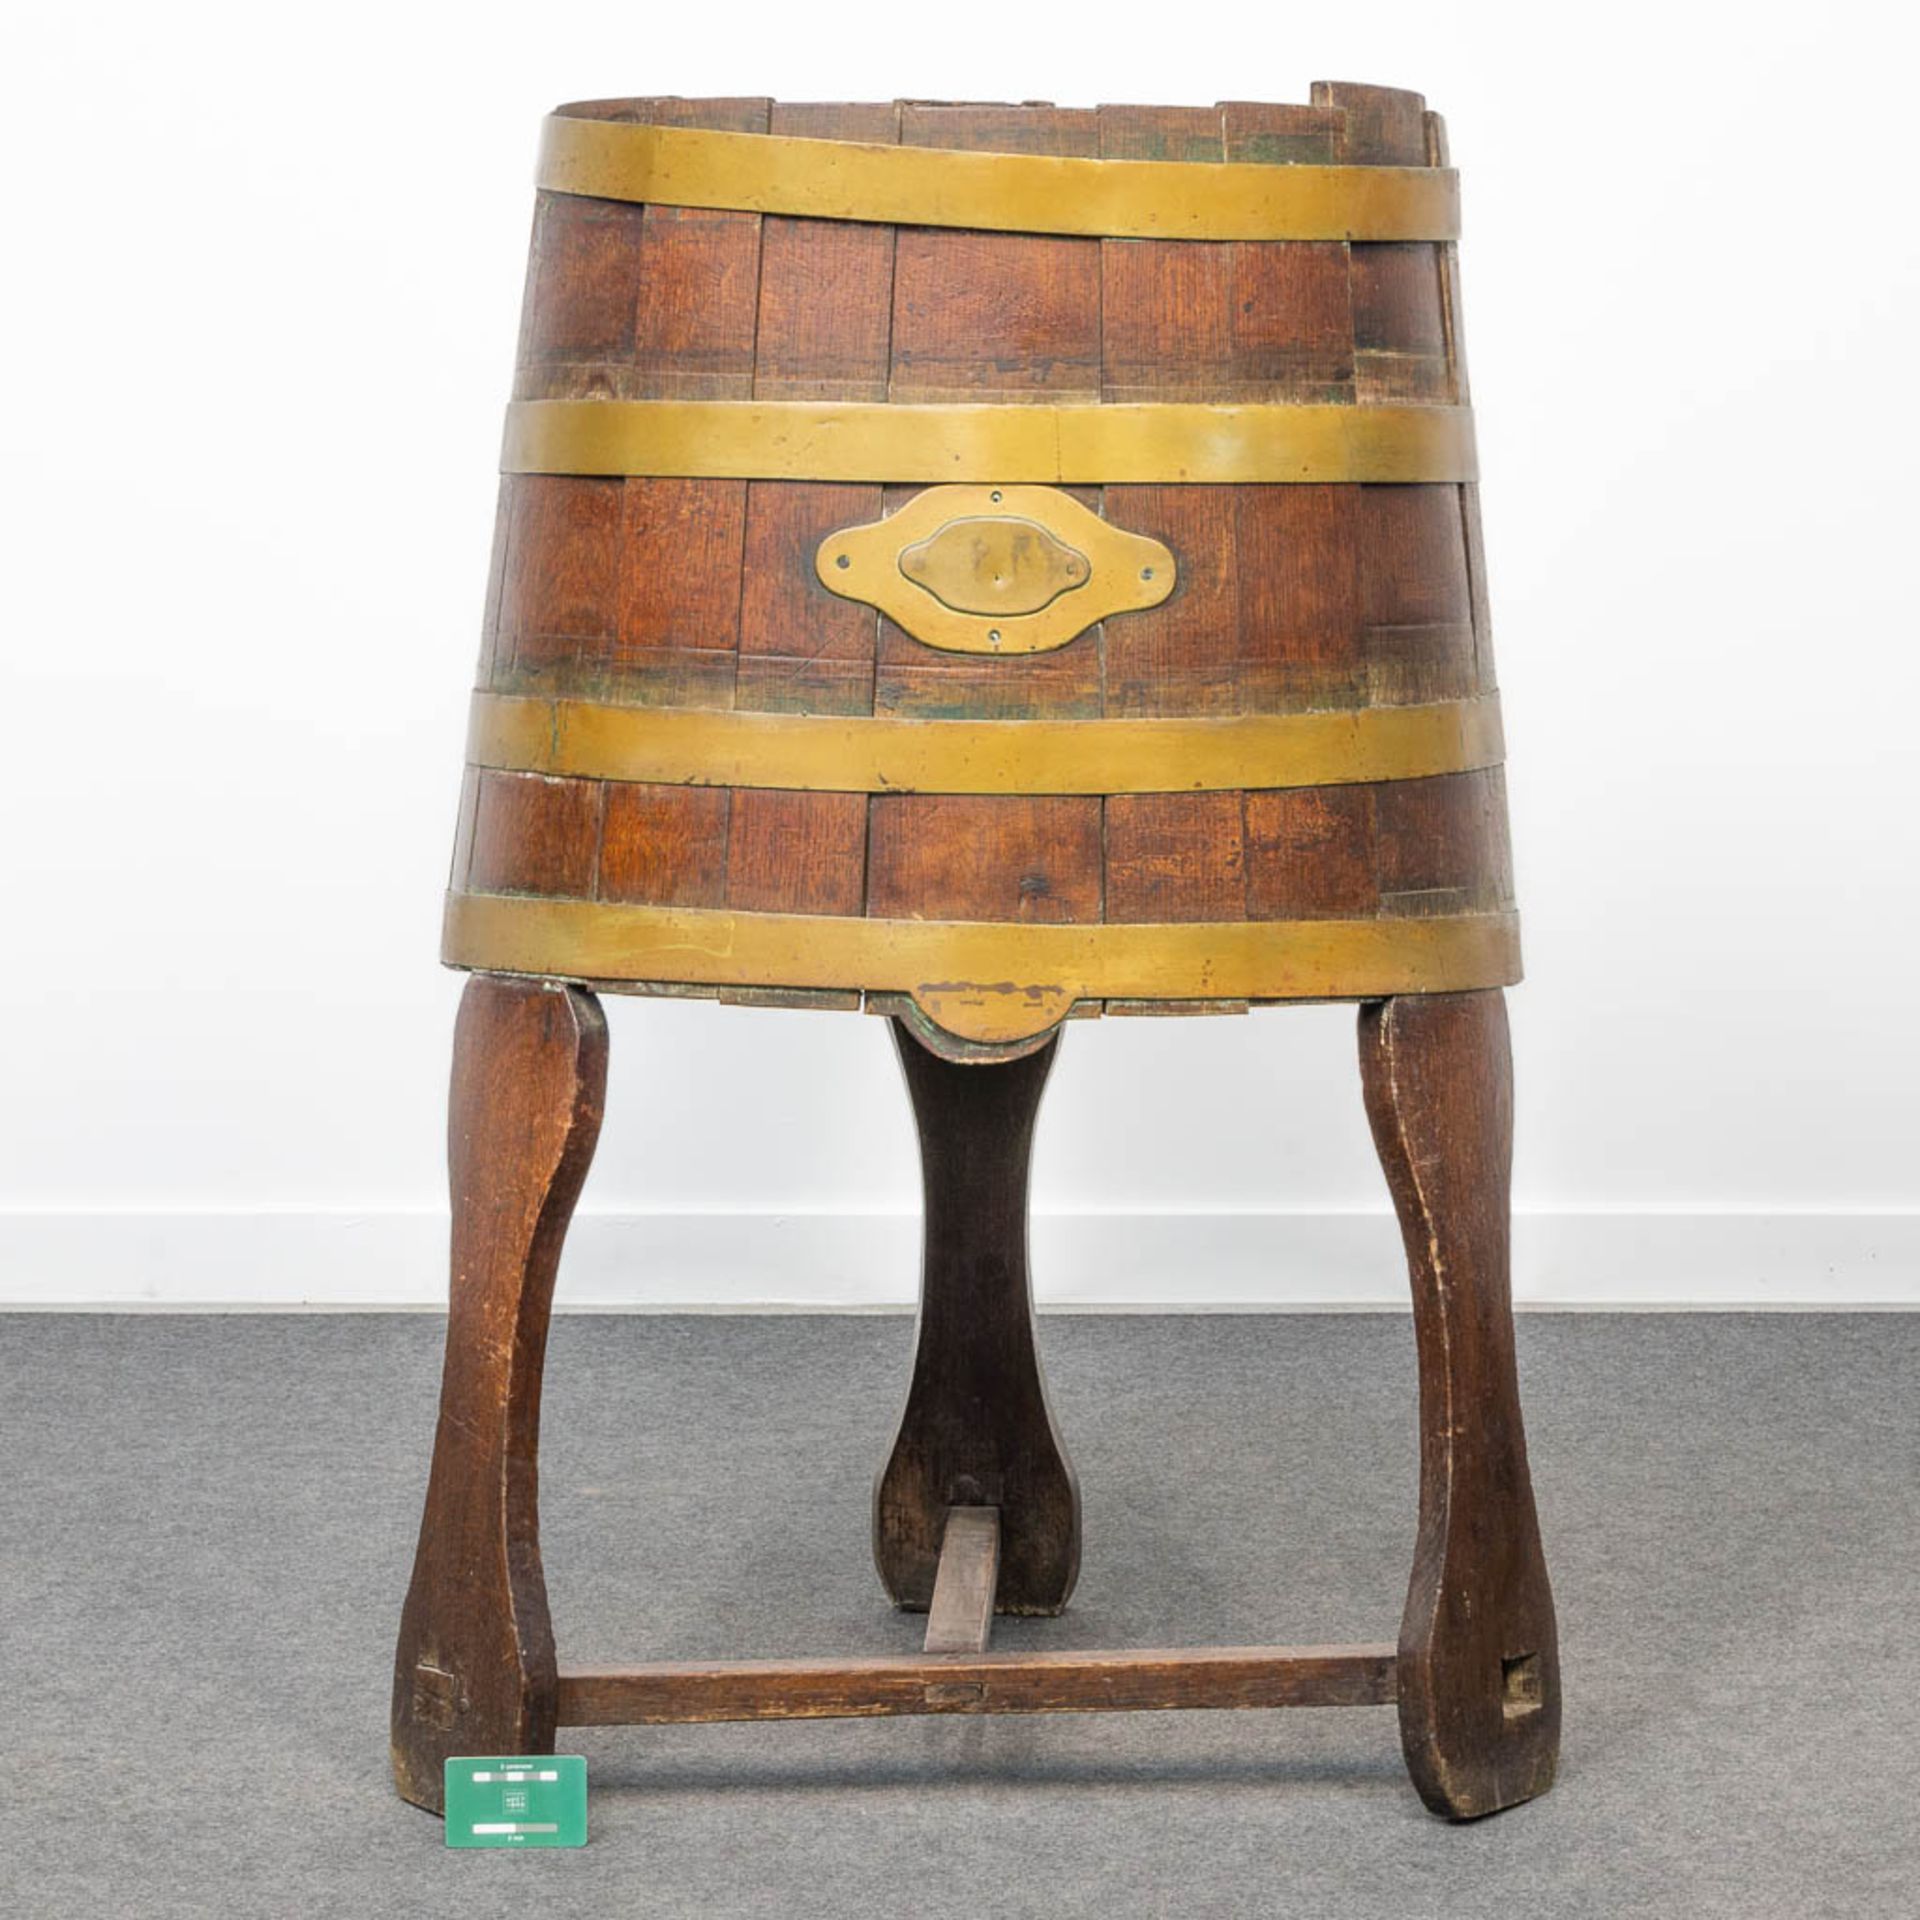 A churn standing on a base, made of oak and brass. (61 x 51 x 105 cm) - Image 4 of 6